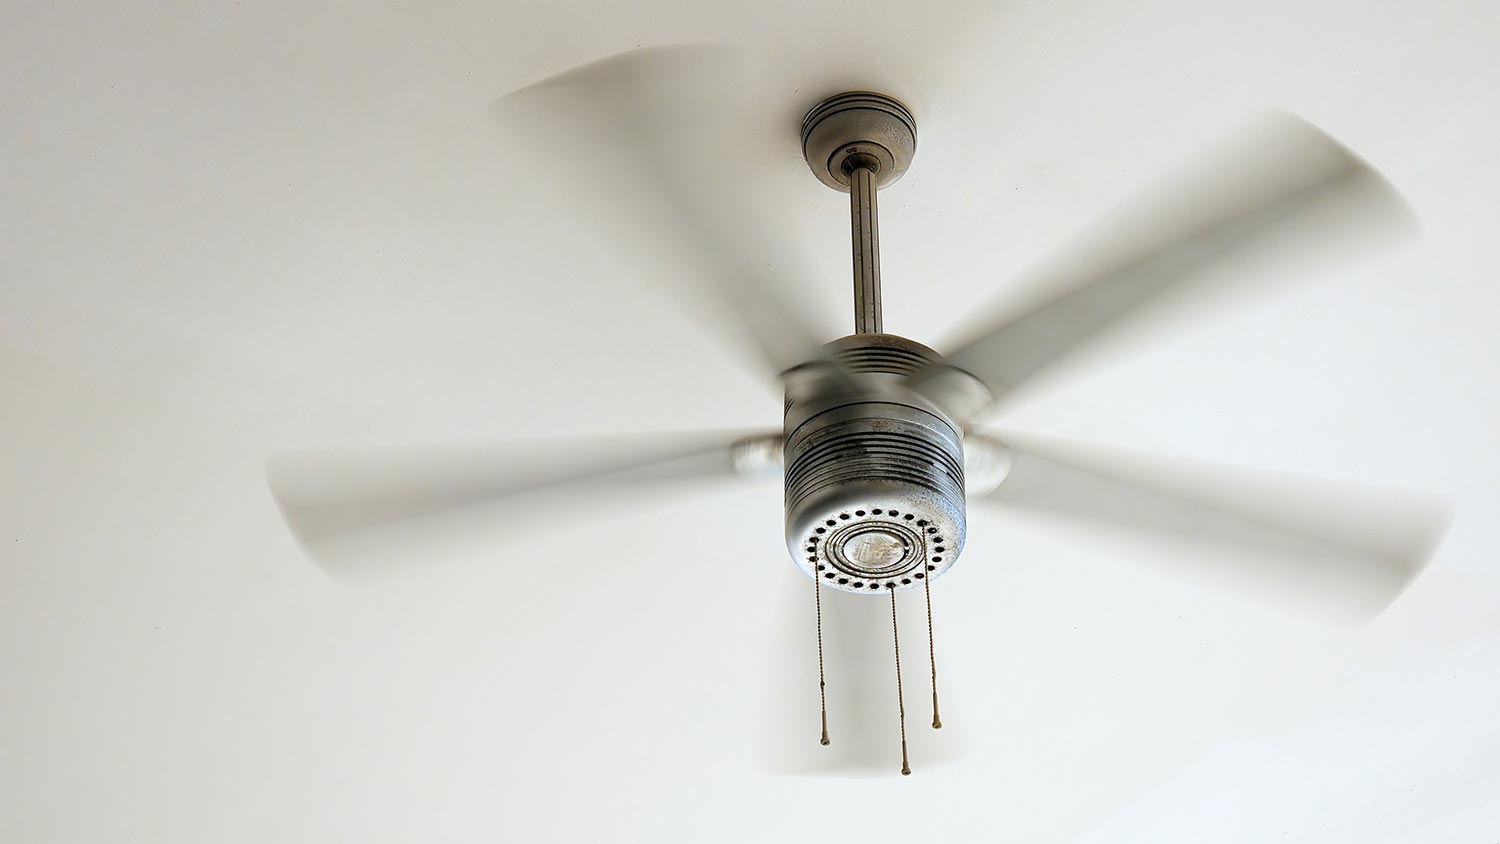 Ceiling fan is rotating at the ceiling of the room